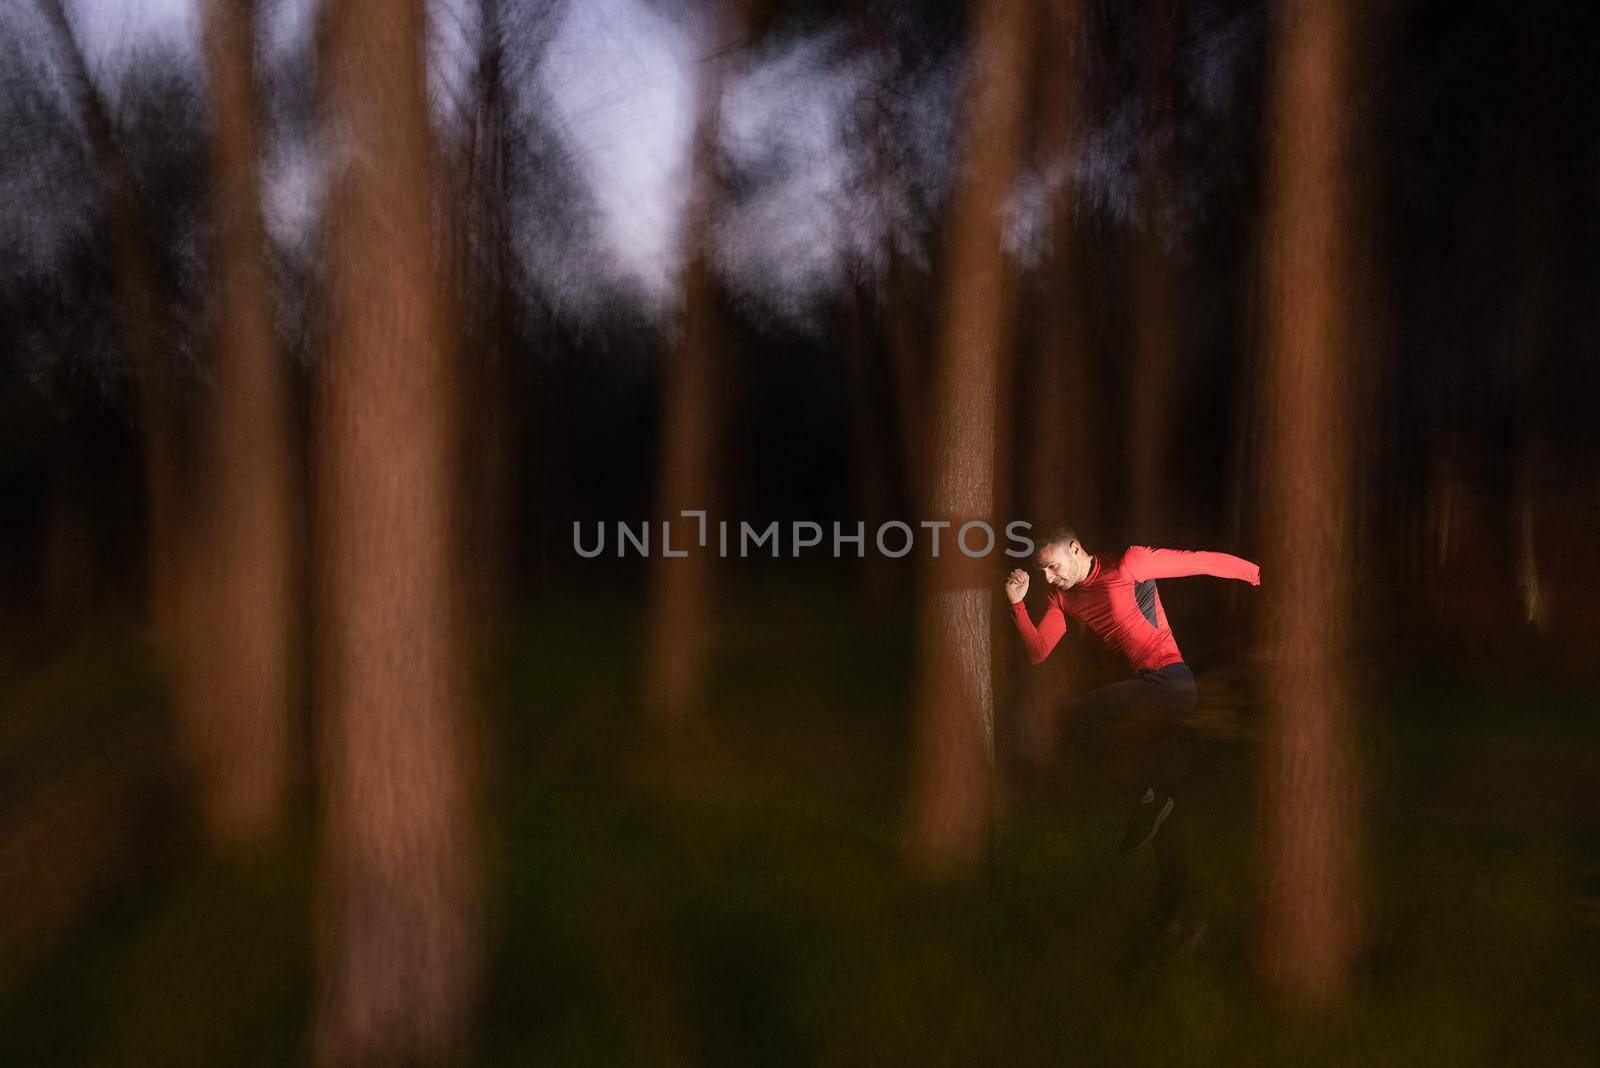 Man running through the trees on a blurred motion of forest. Nature abstract background.